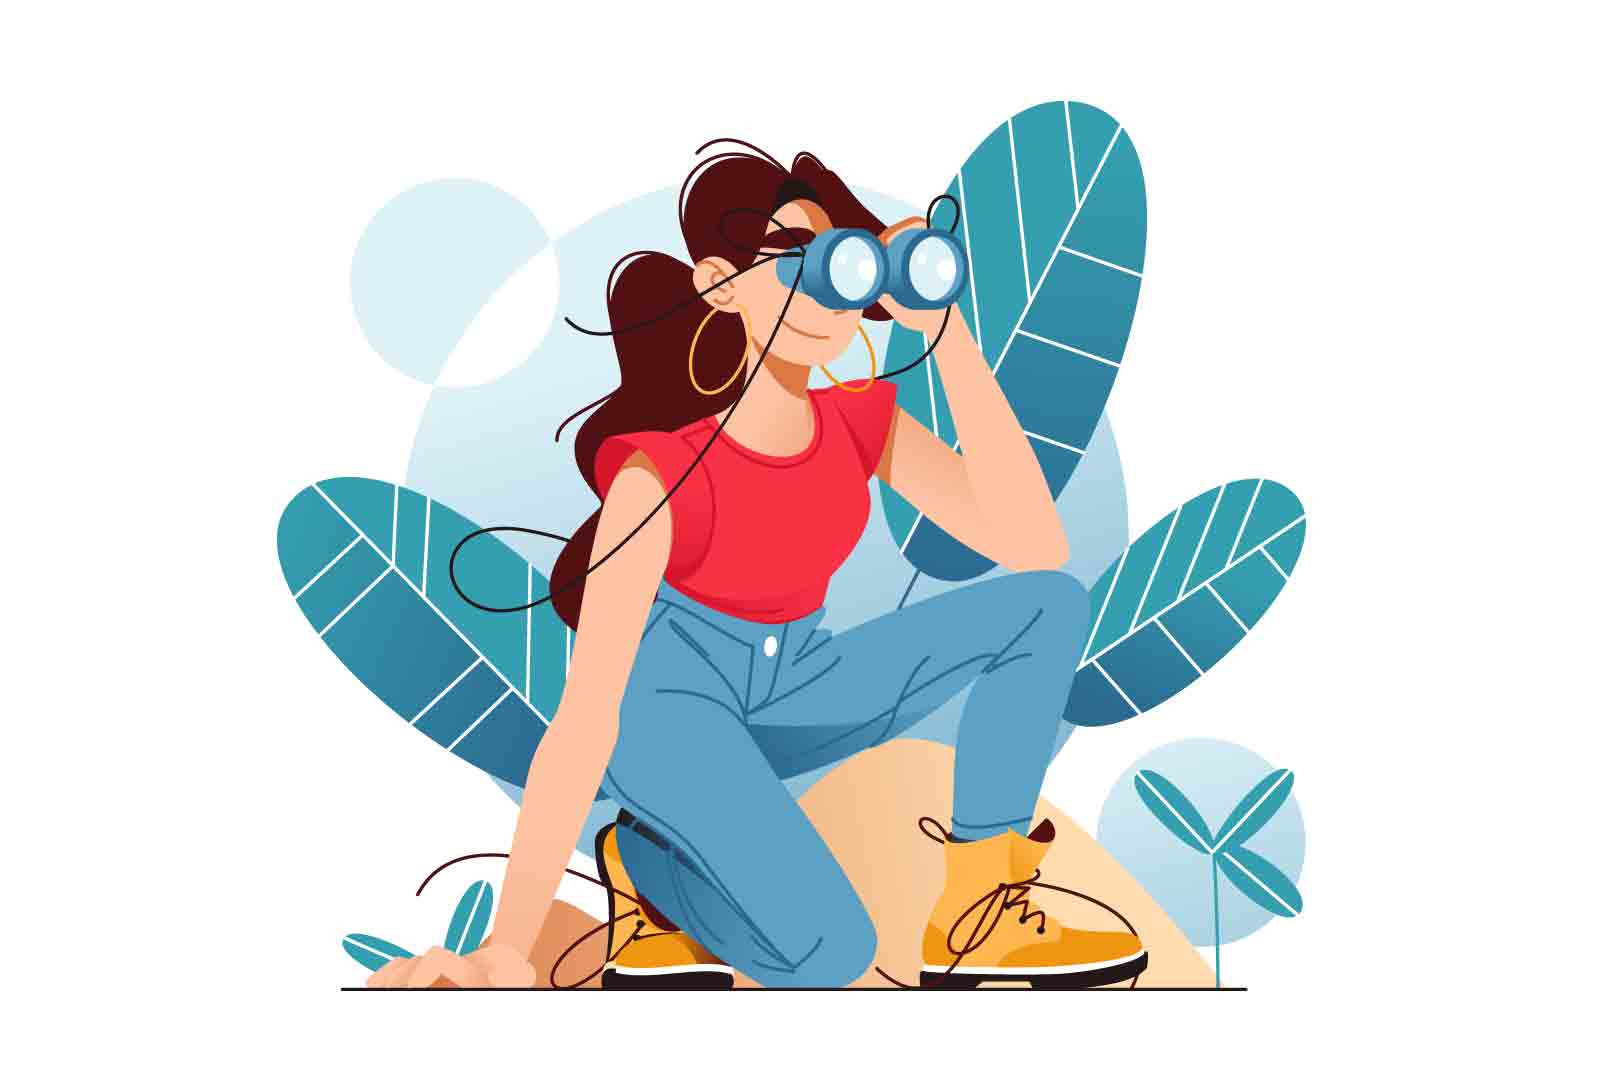 Girl searching for something, using binoculars. Exploration and discovery concept, vector illustration.